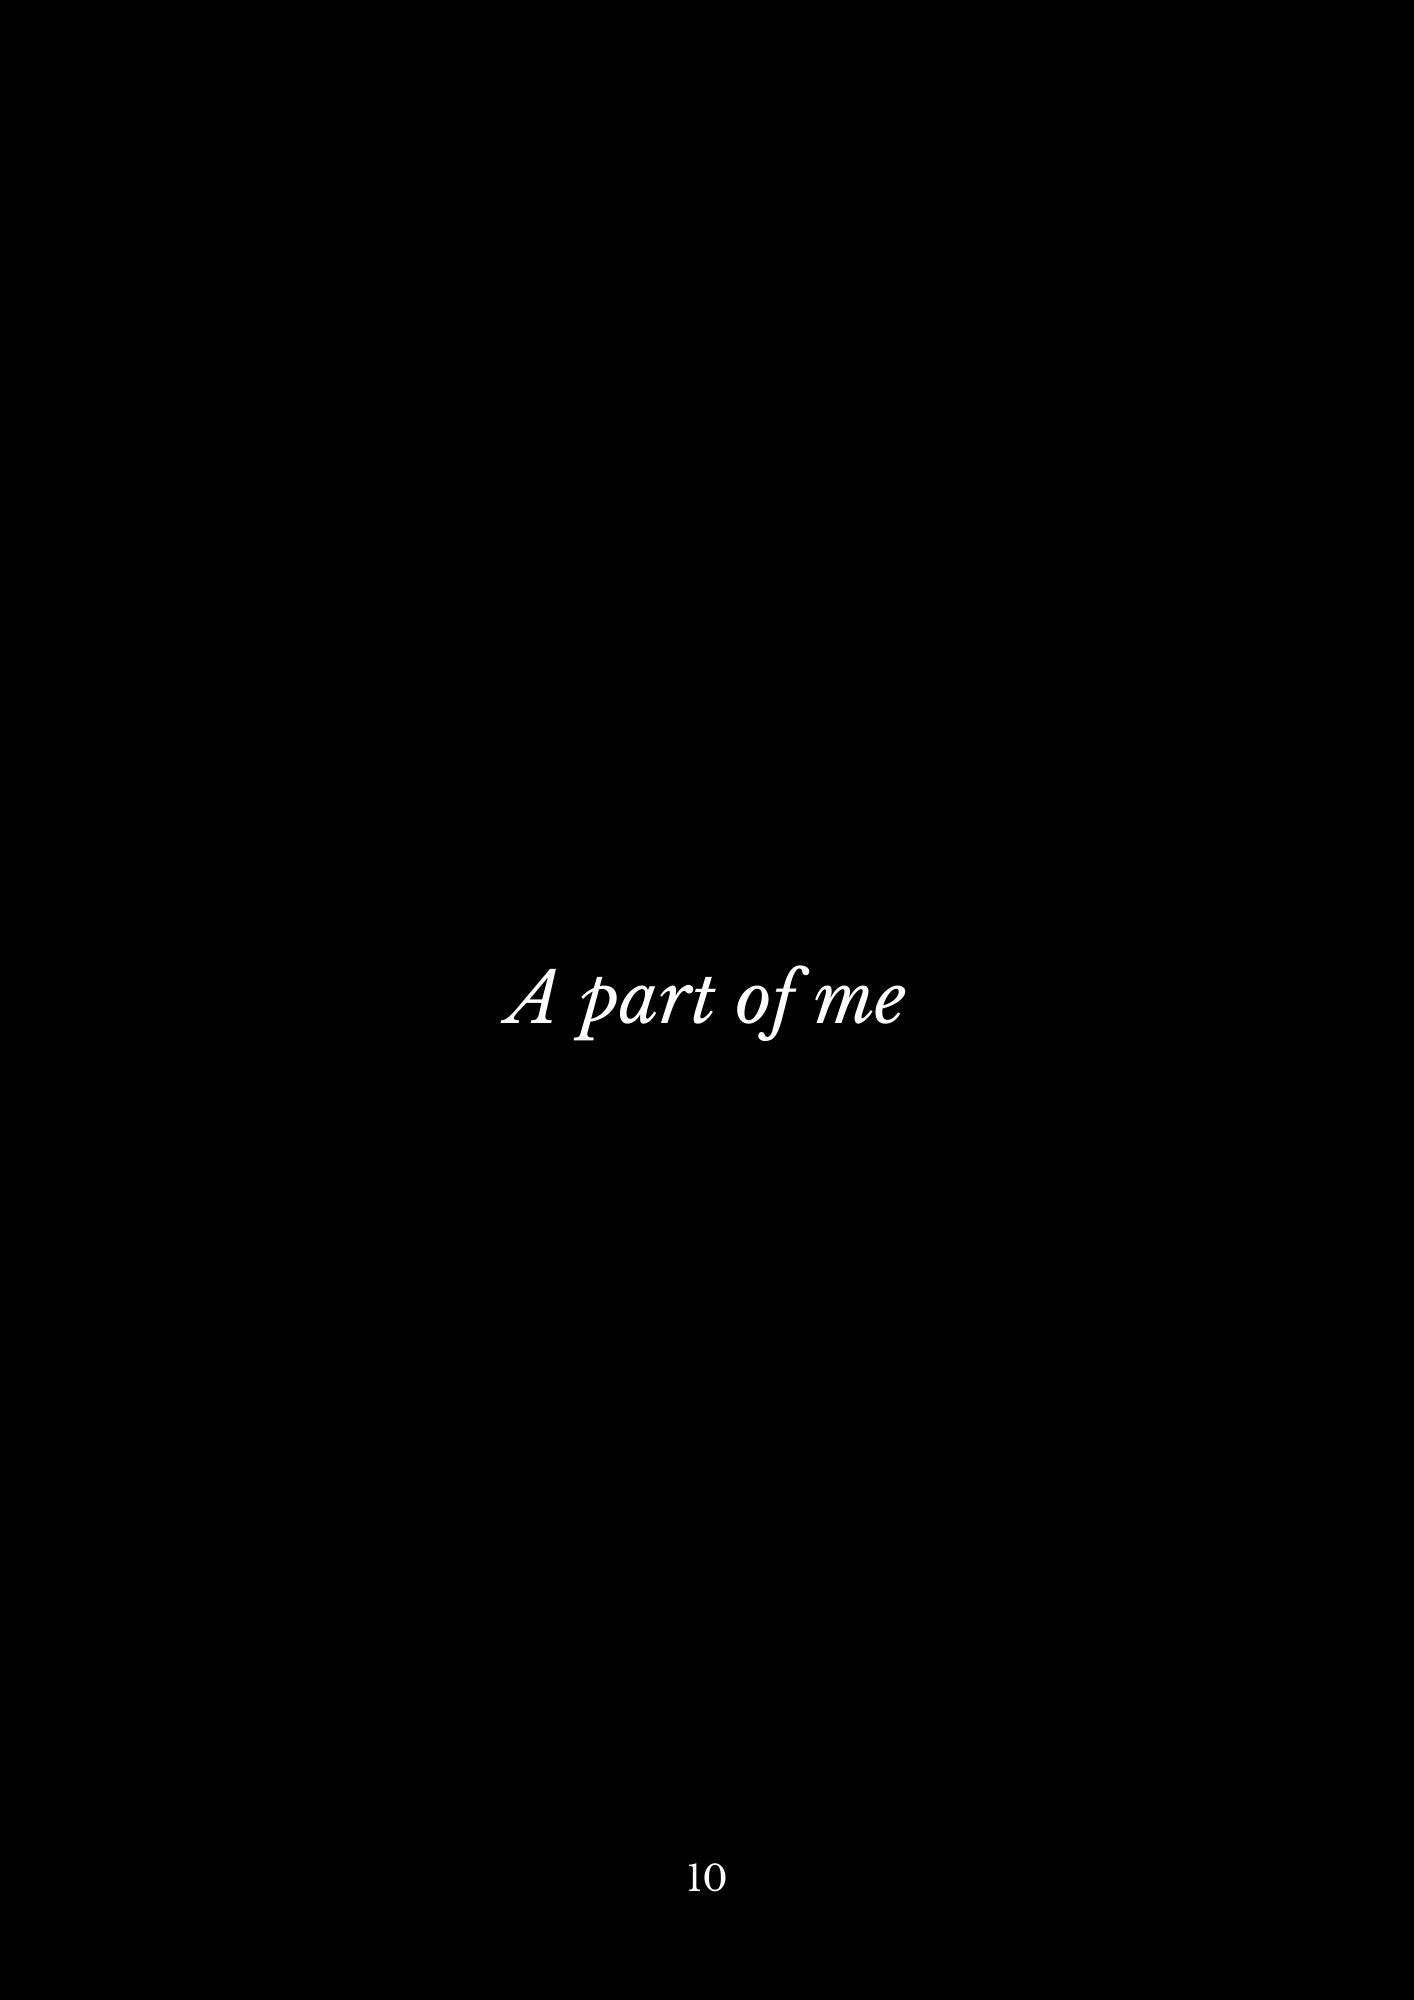 a part of me, title in english